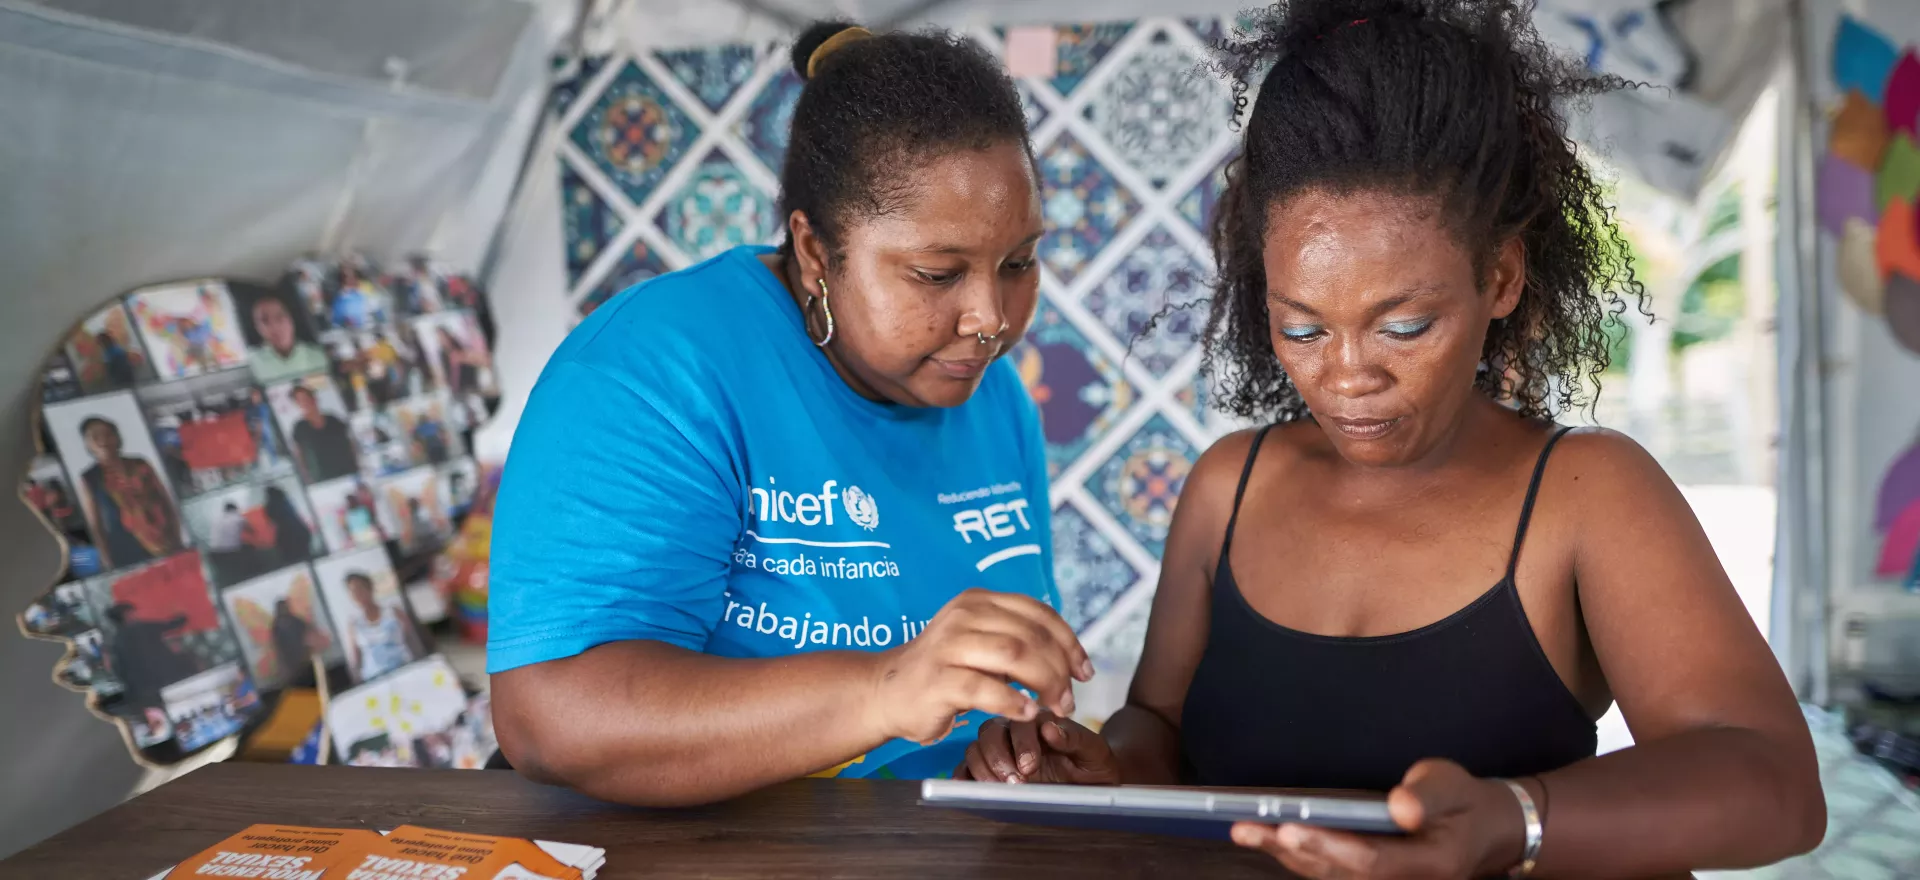 A woman wearing a UNICEF shirt helps another woman use a tablet device.